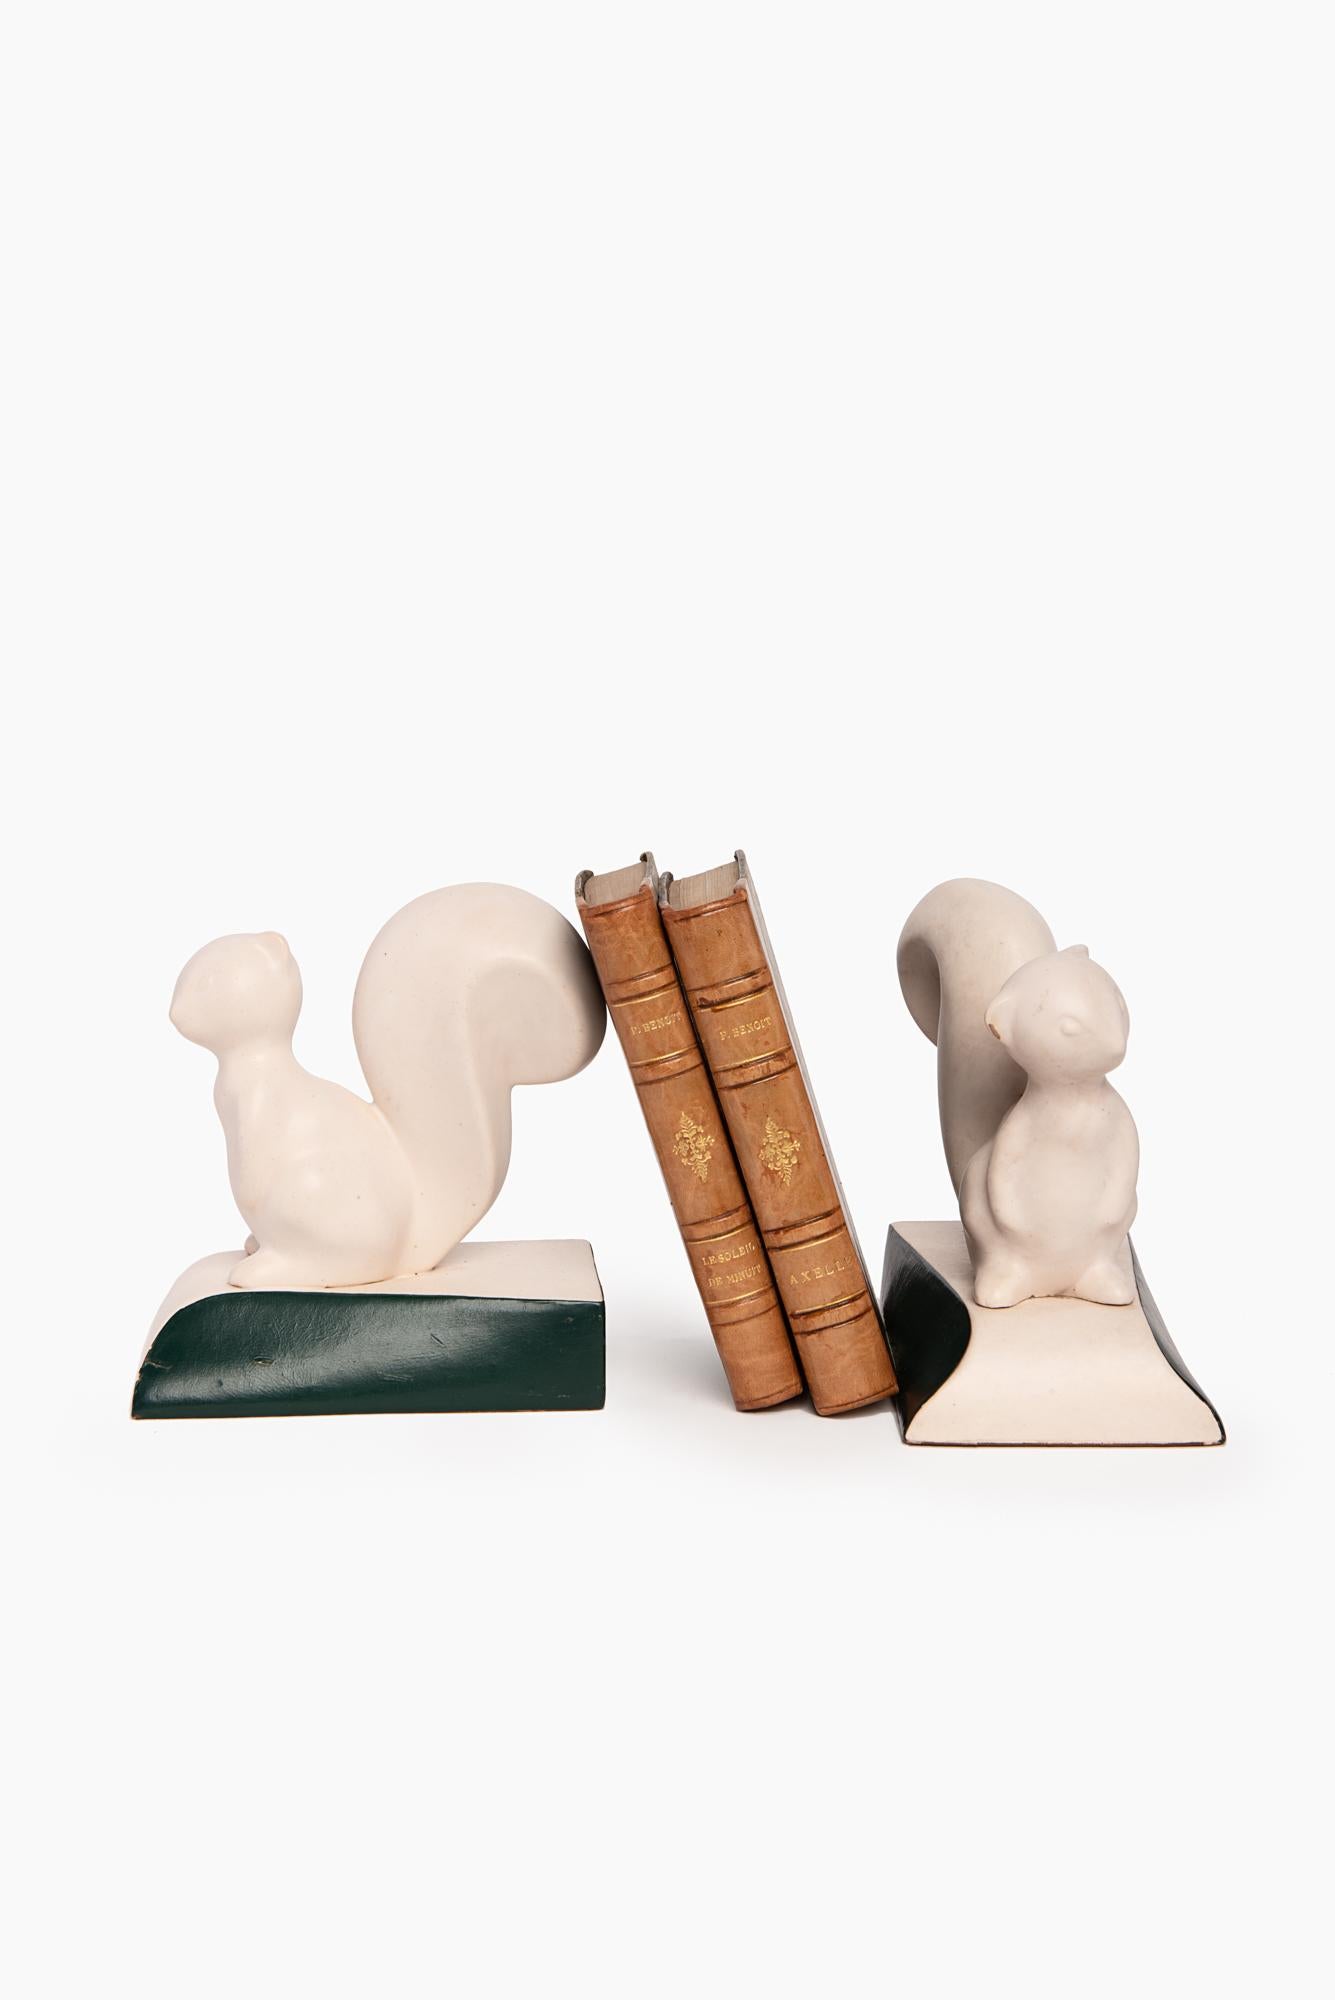 Lovely pair of French Art Deco style bookends; two stylized squirrels in fine white porcelain are depicted; the base is covered with very dark green leather to create a nice contrast with the rest of the object; overall the design is light and